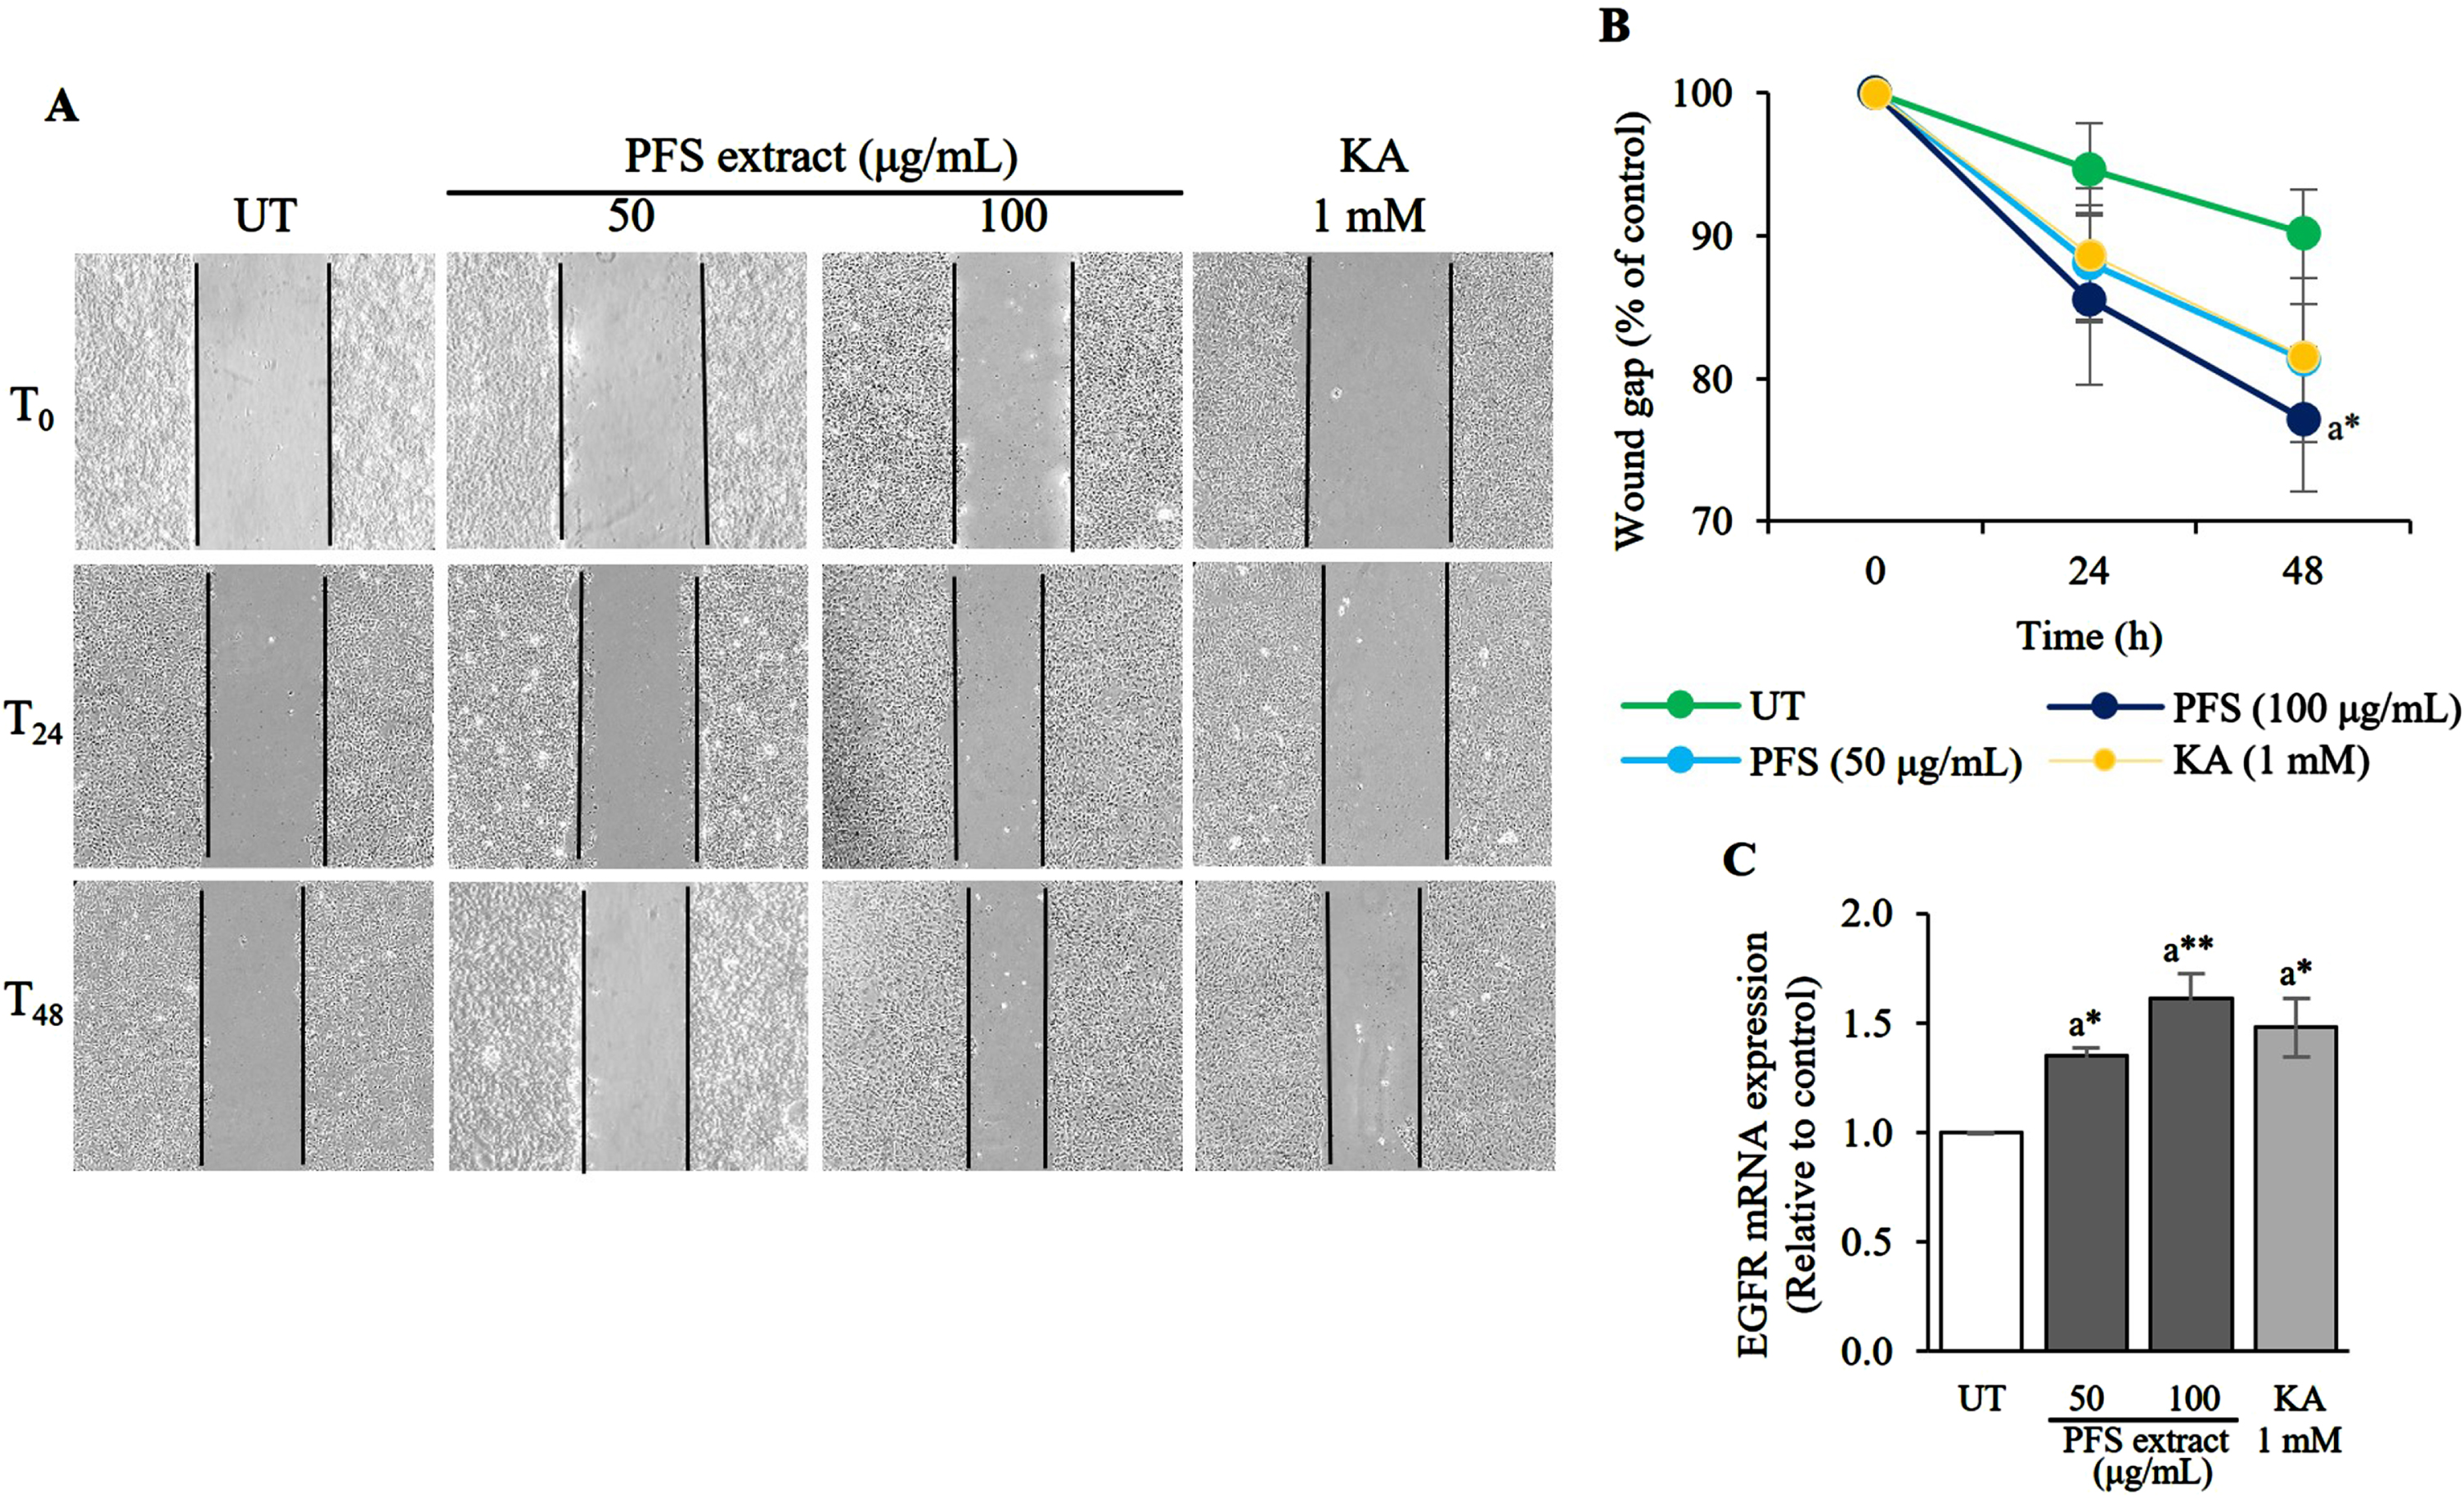 Wound healing acceleration and EGFR mRNA expression enhancement effects of PFS extract. (A) The monolayer of HaCaT cells that was scratched to mimic a wound and treated daily with PFS extract (50 or 100 μg/mL). The wound gap was recorded after 0, 24, and 48 h after initiation of the wound. (B) The wound gap was analyzed by Image J software and calculated to the percentage by compared to the gap at 0 h in each treatment group. The per cent values were plotted in a line chart compared to the untreated cells (UT) at each time point (24 and 48 h) and the results are presented as mean±SD. (C) The expression of EGFR mRNA in each treatment group was calculated using the 2–ΔΔCt values and expressed as a bar graph relative to the untreated cells. The results are presented as mean±SD. *, ** Statistical significance at p≤0.05 and p≤0.01, respectively. a compared to UT. UT; untreated cells, KA; kojic acid (1 mM) served as positive control.